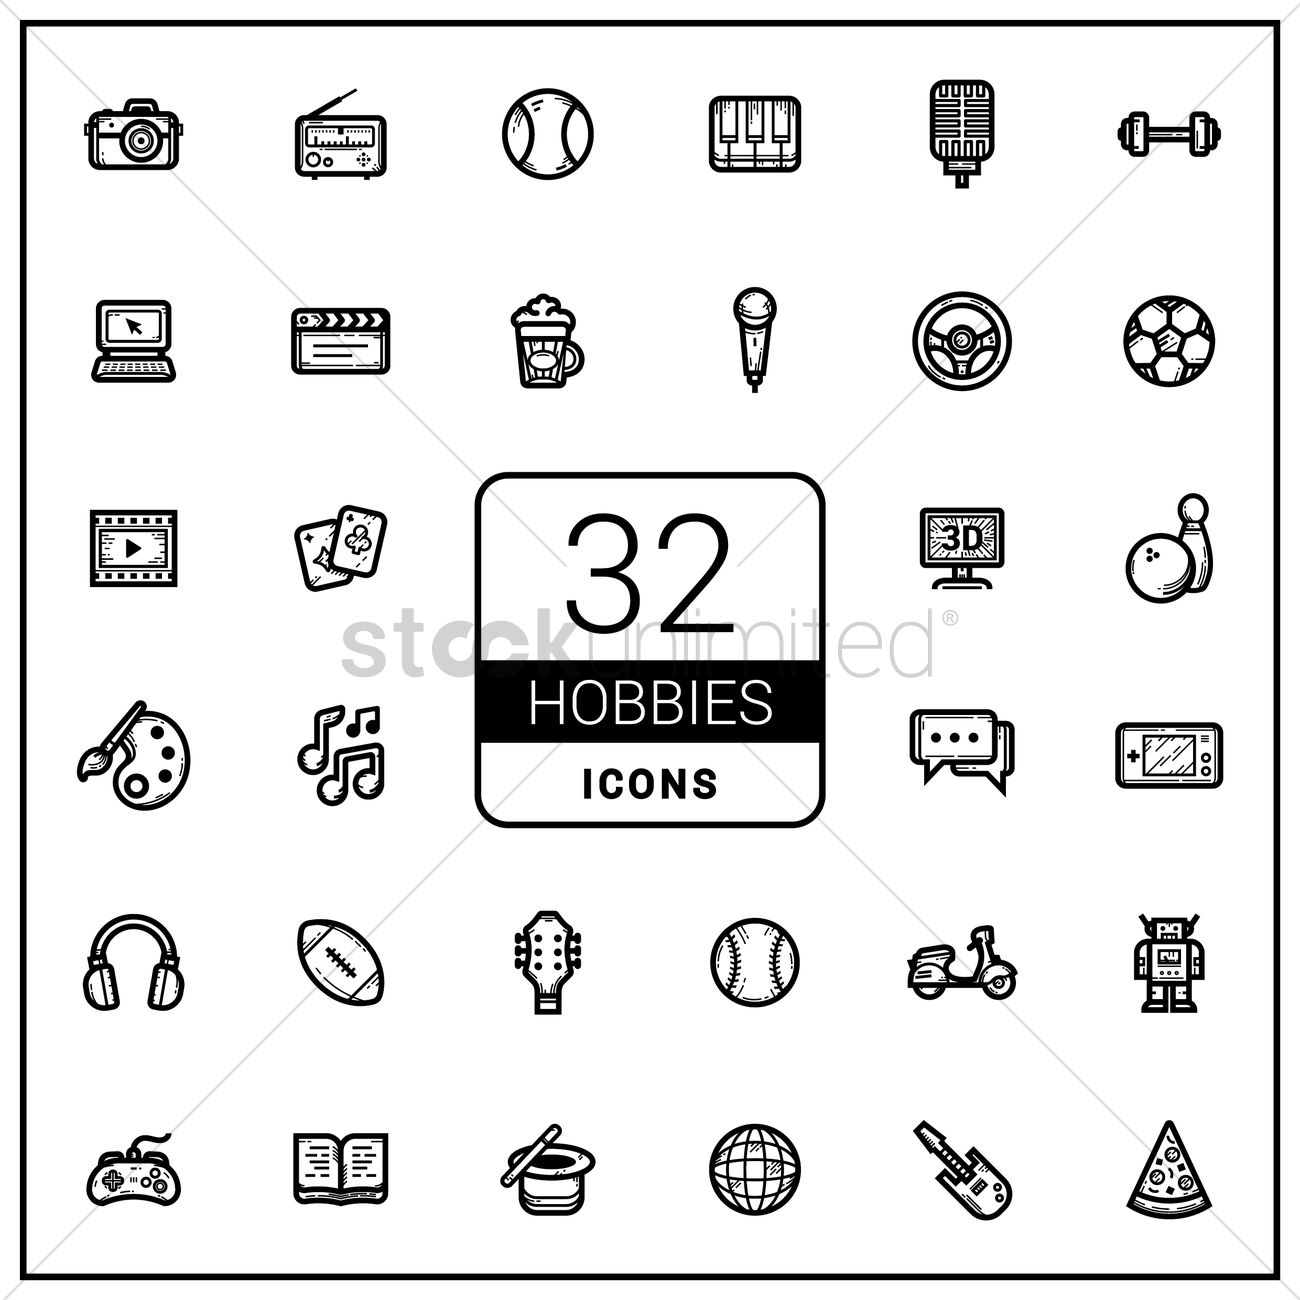 27 hobby icon packs - Vector icon packs - SVG, PSD, PNG, EPS 